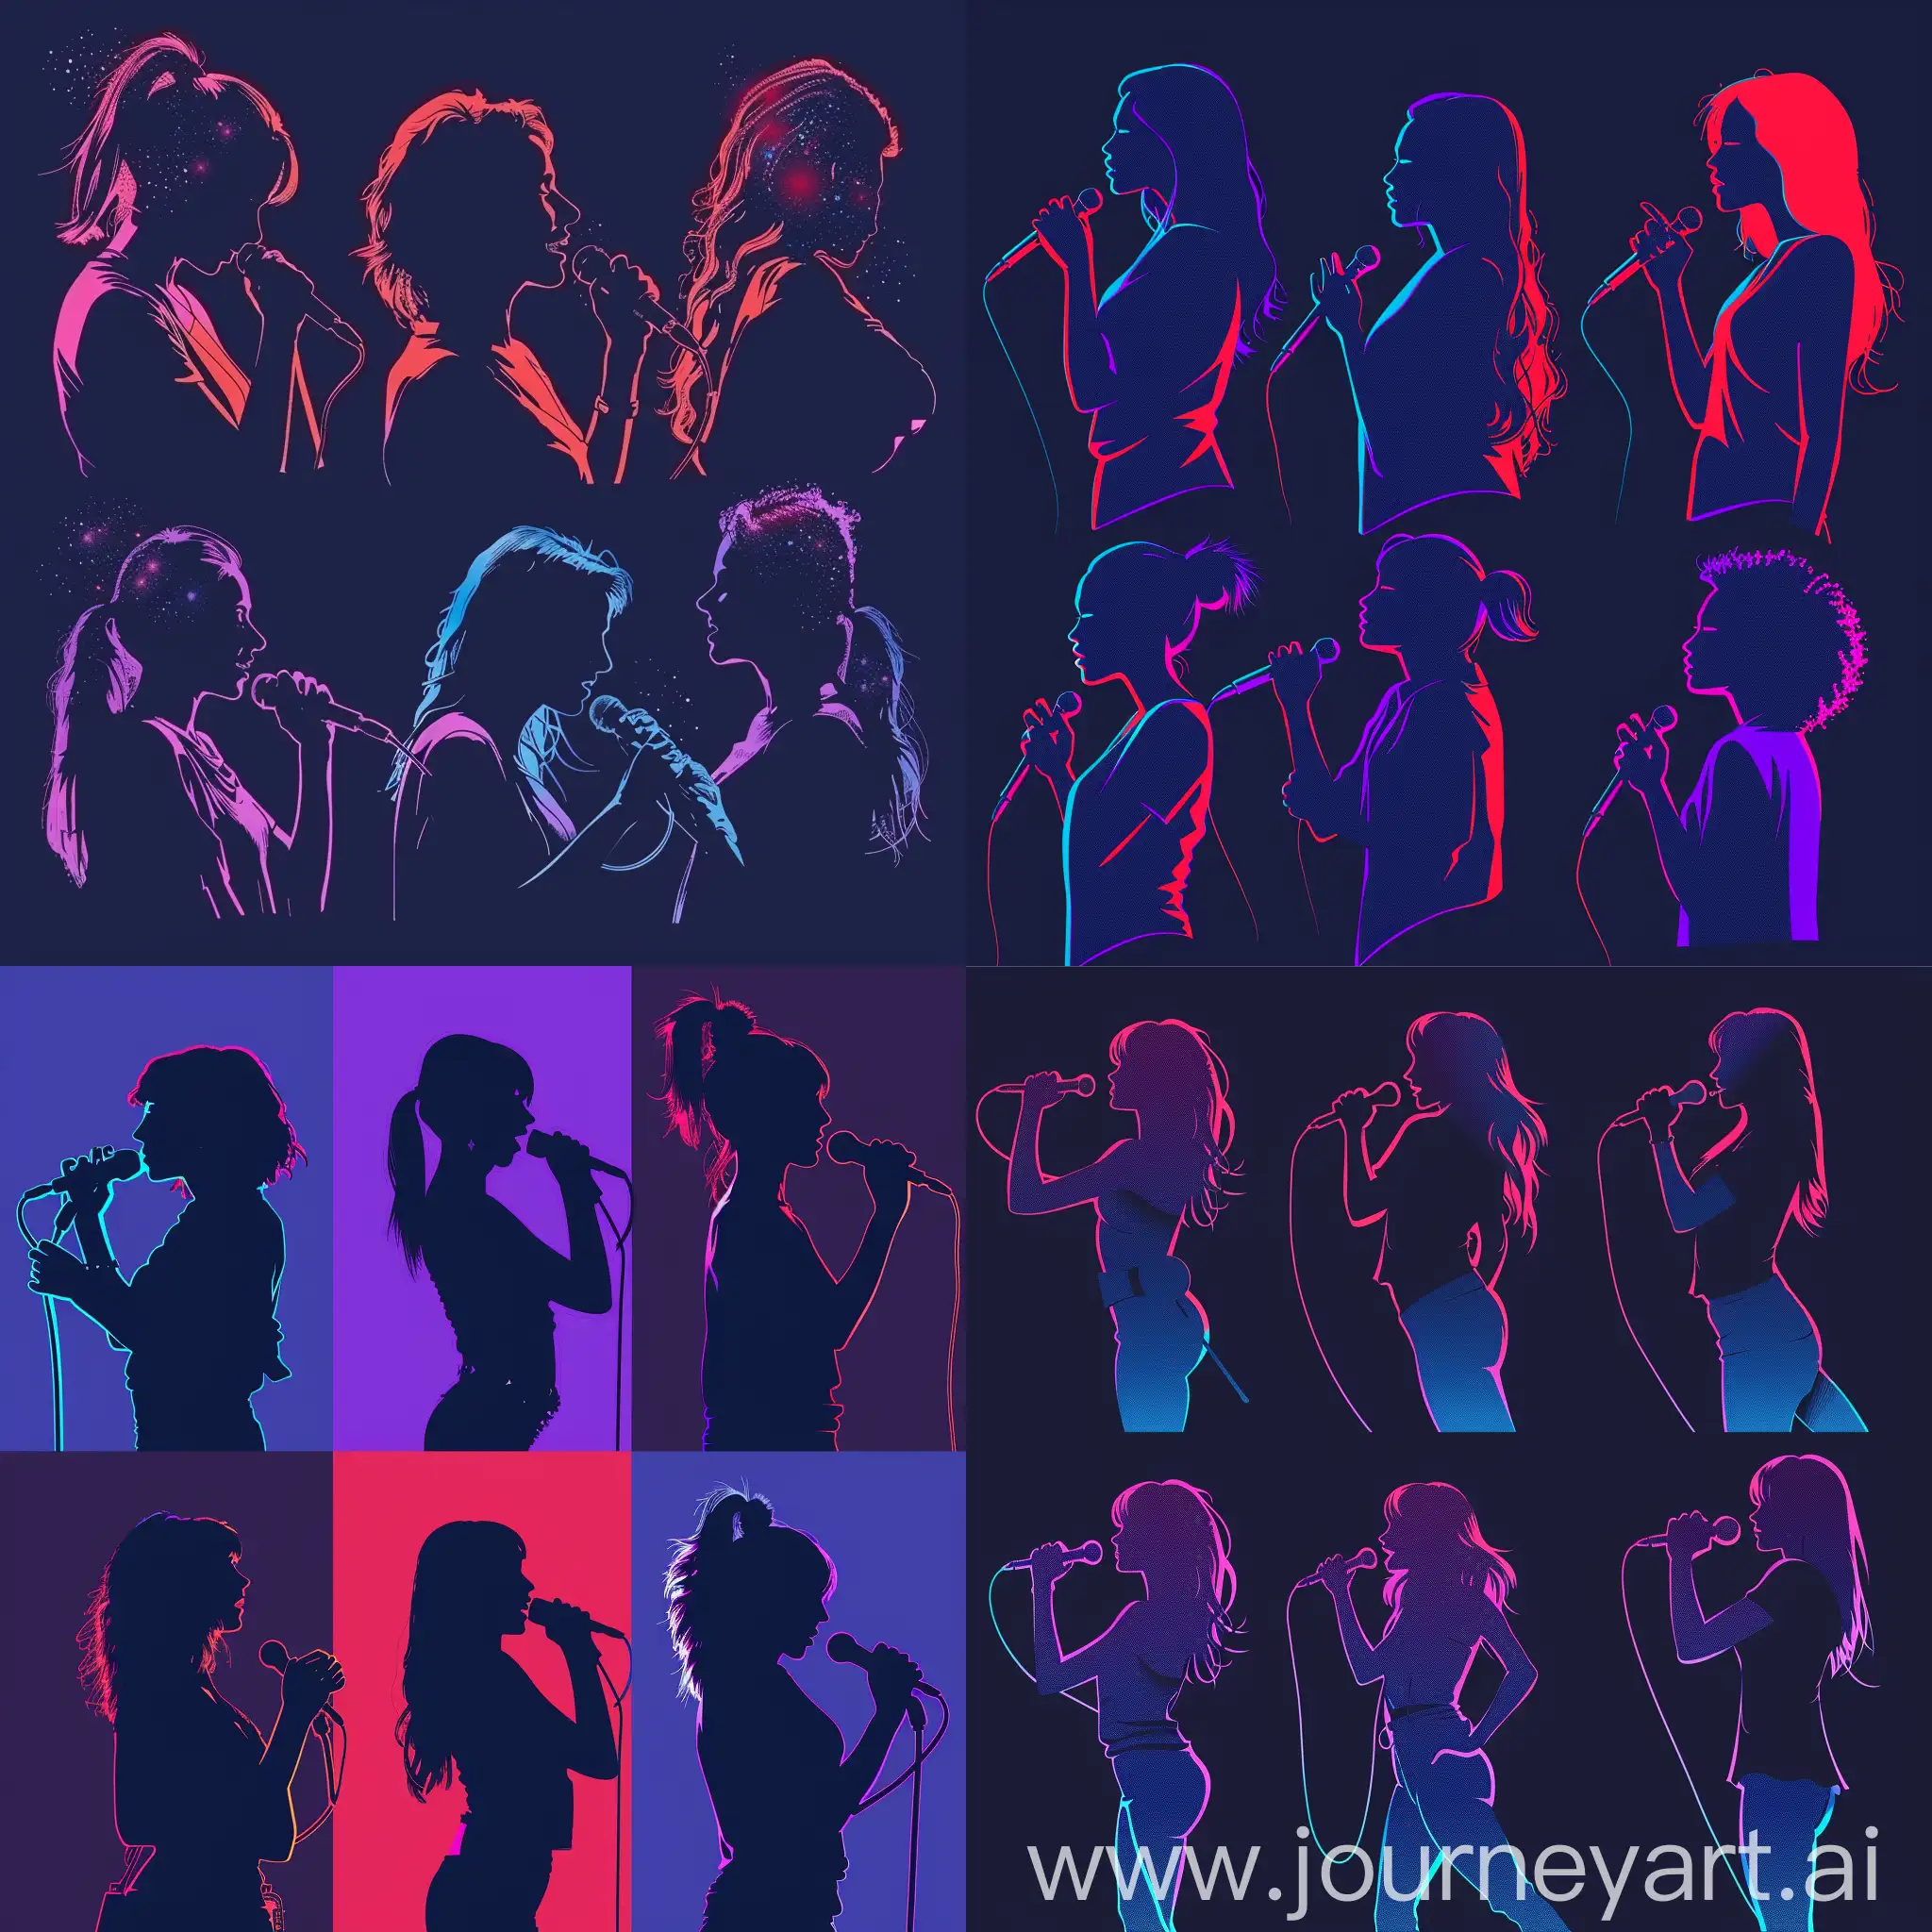 Female silhouettes with microphones, evening, poster, jazz, six girls, concert, vocals, blue, purple, red, neon